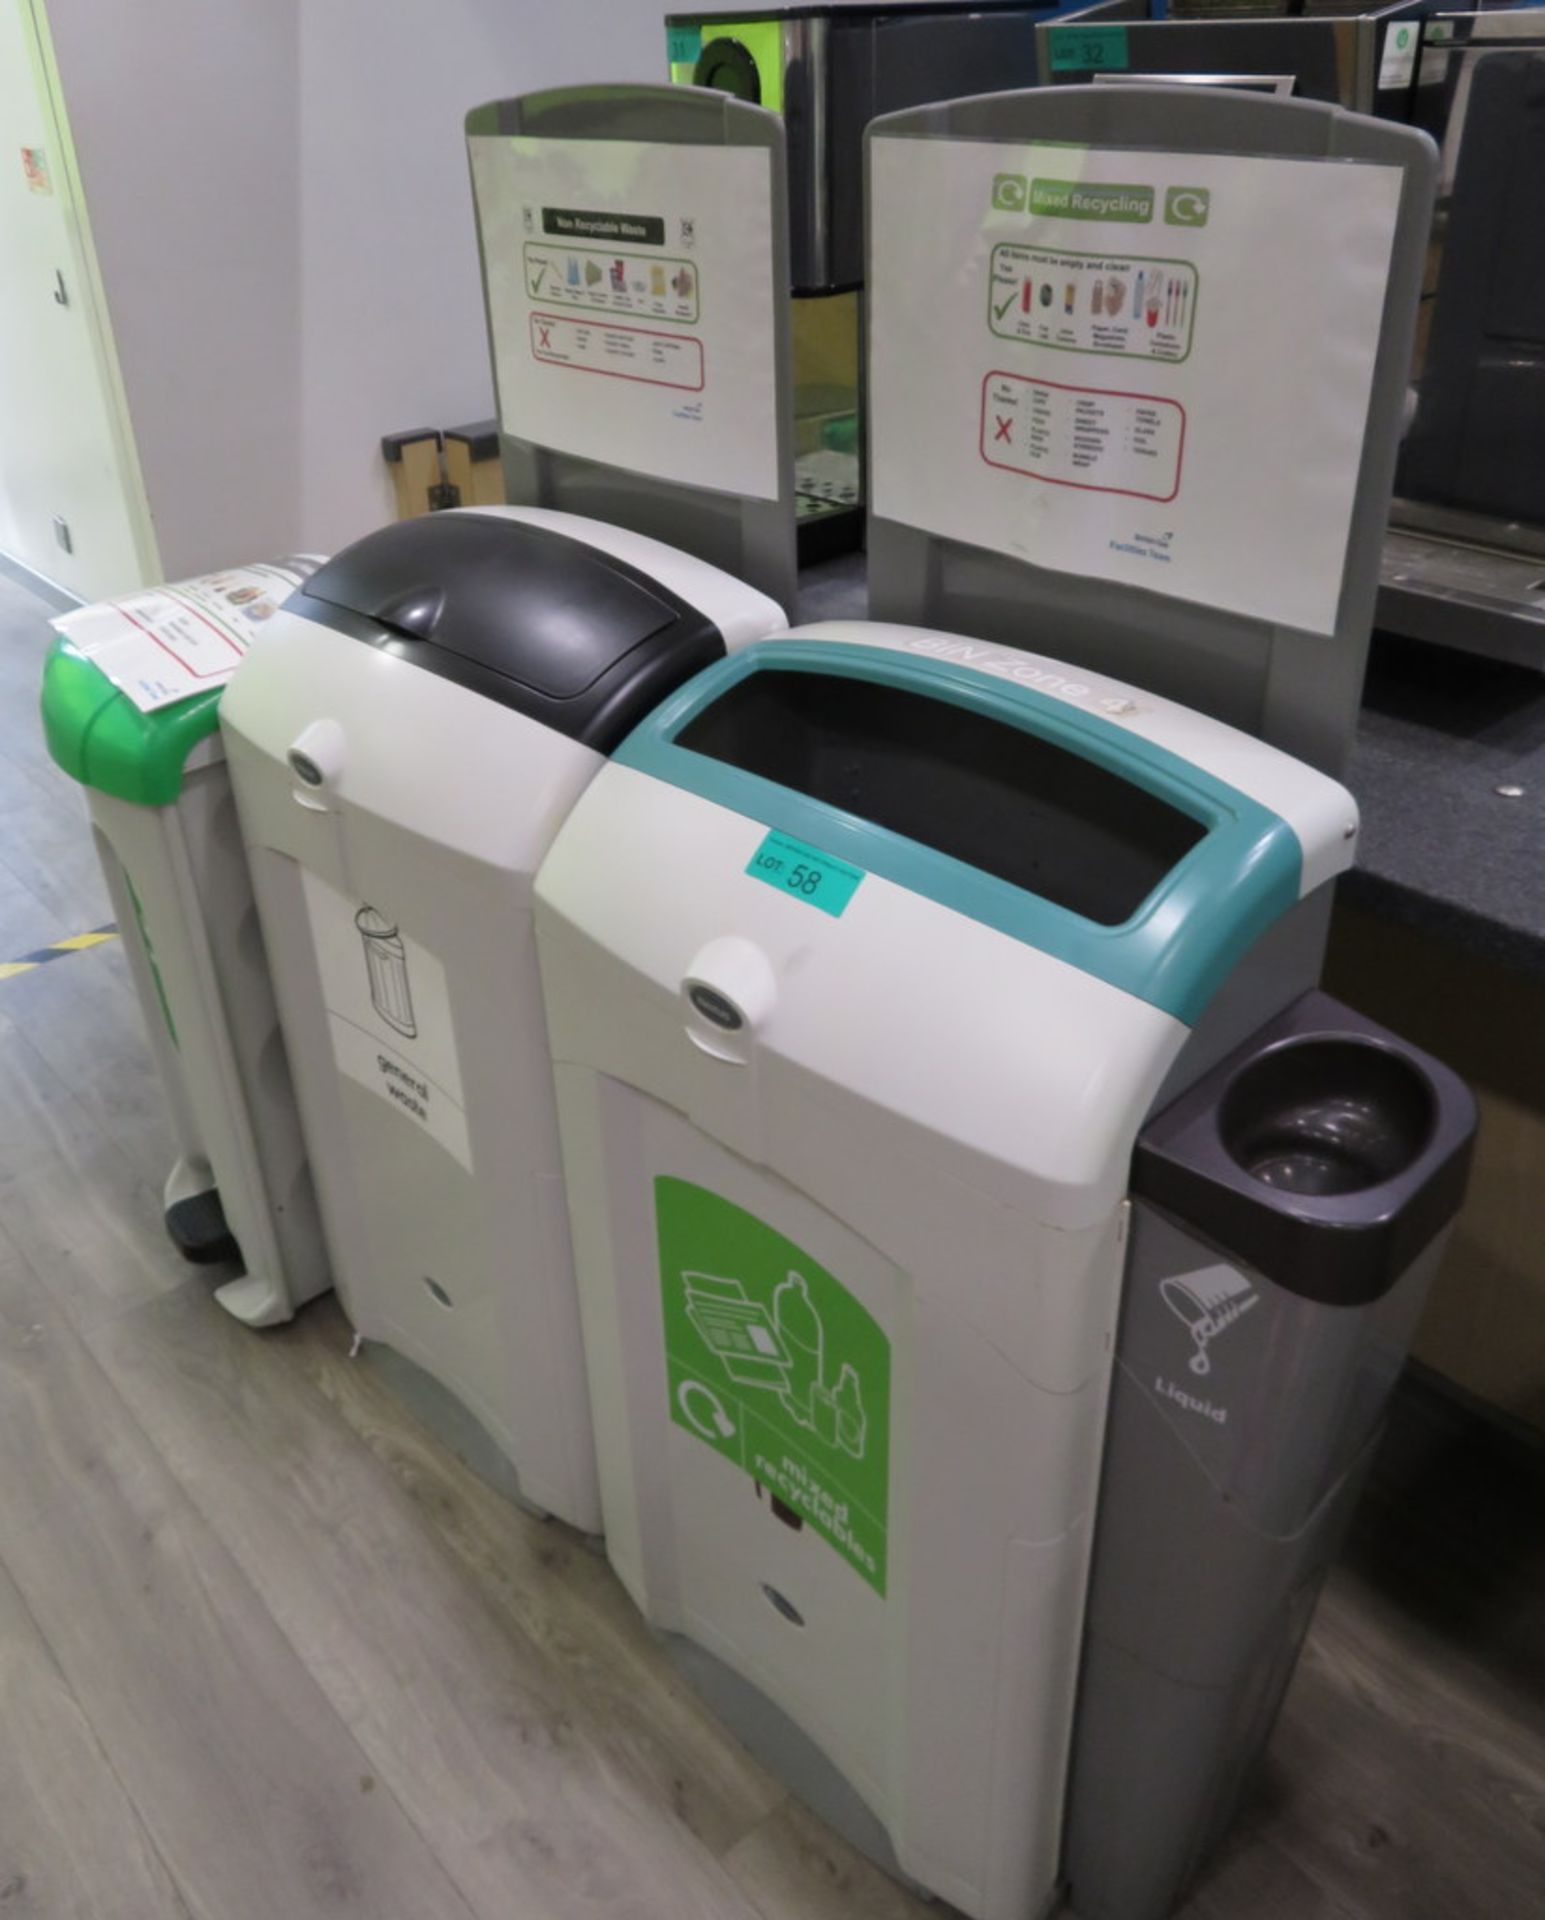 3x Various Waste Bins. To Include: General Waste, Mixed Recyclables & Food Waste. - Image 2 of 2